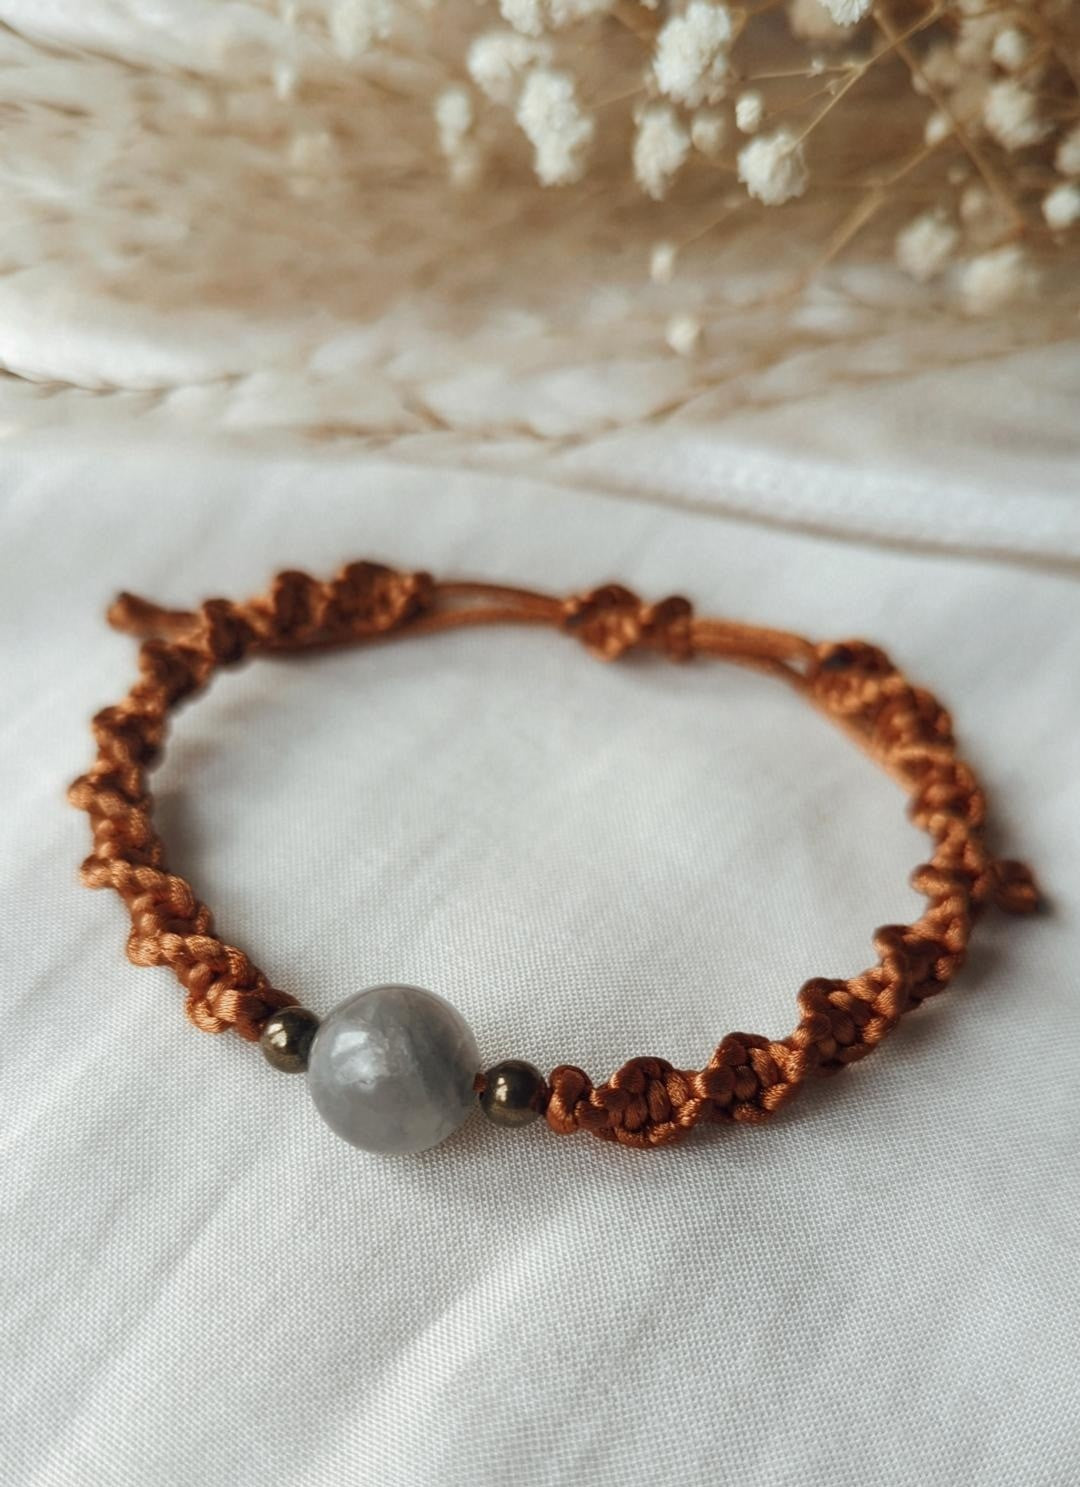 Custom Stone Bracelet Made with Natural Healing Stones, Beads and More Macrame Knotted